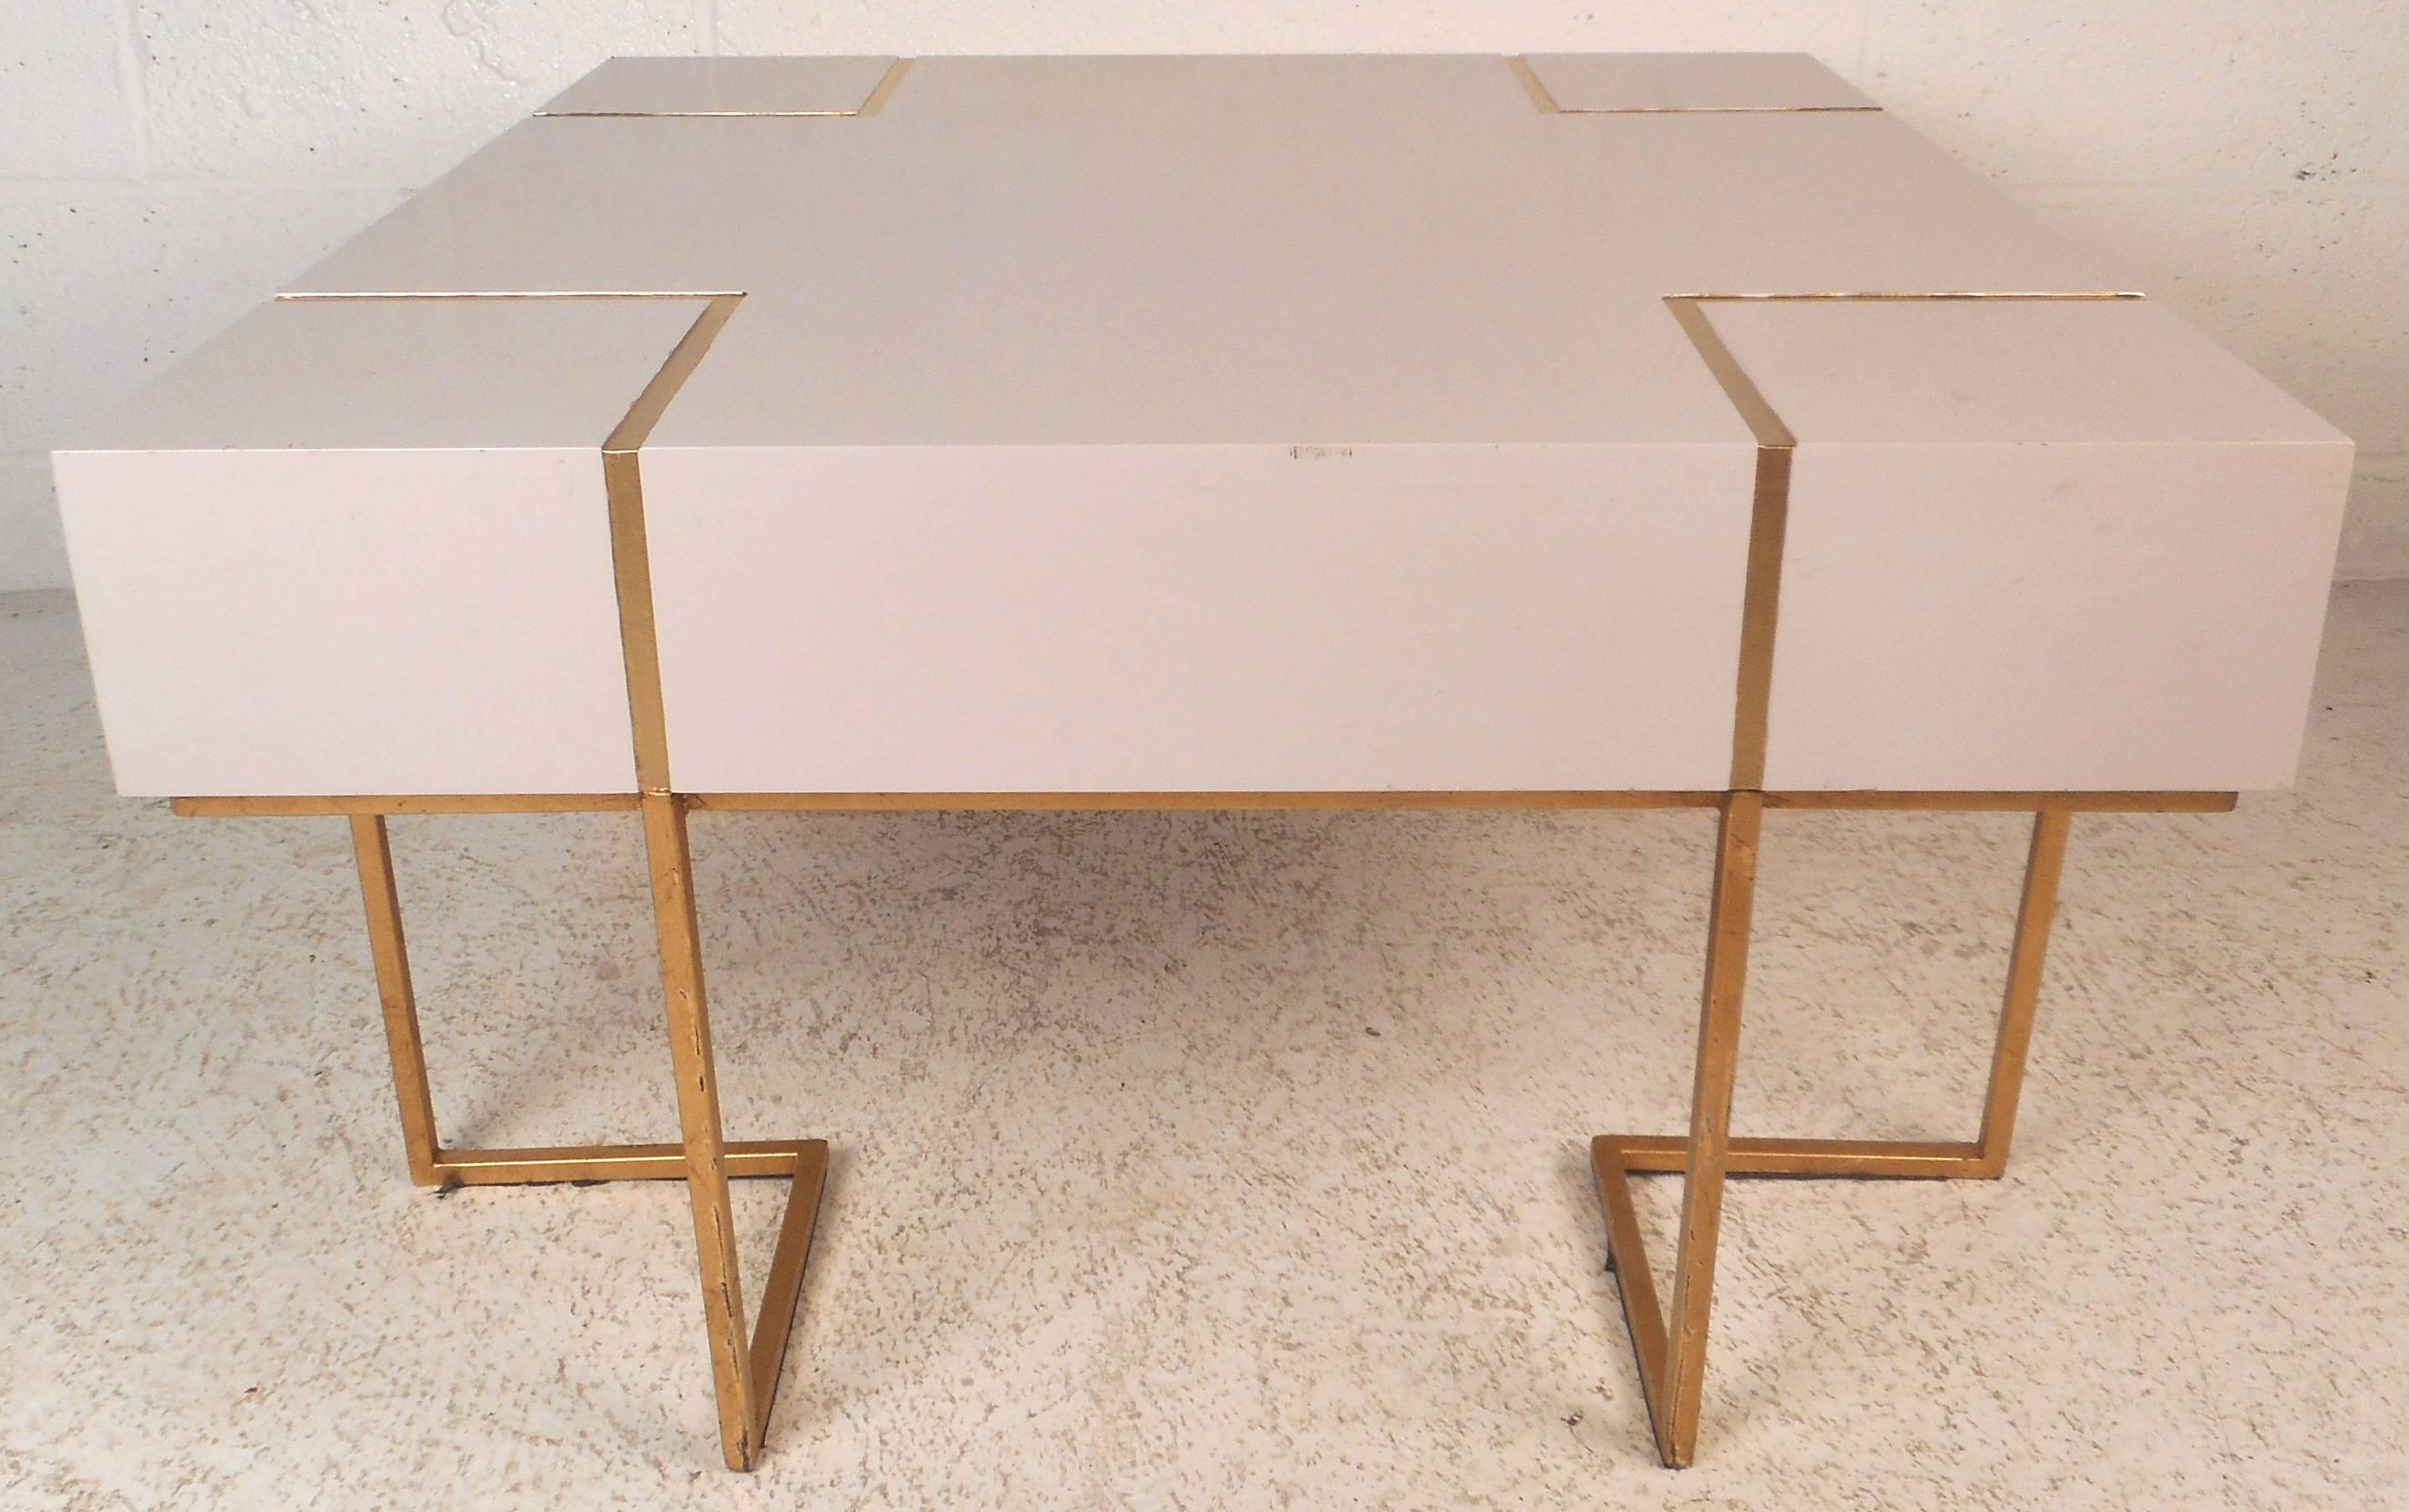 This gorgeous vintage modern decorator coffee table features a unique sculptural gold painted base. The elegant inlay on the top and straight line design add to the mid-century appeal. Quality construction with intricate detail makes this piece the